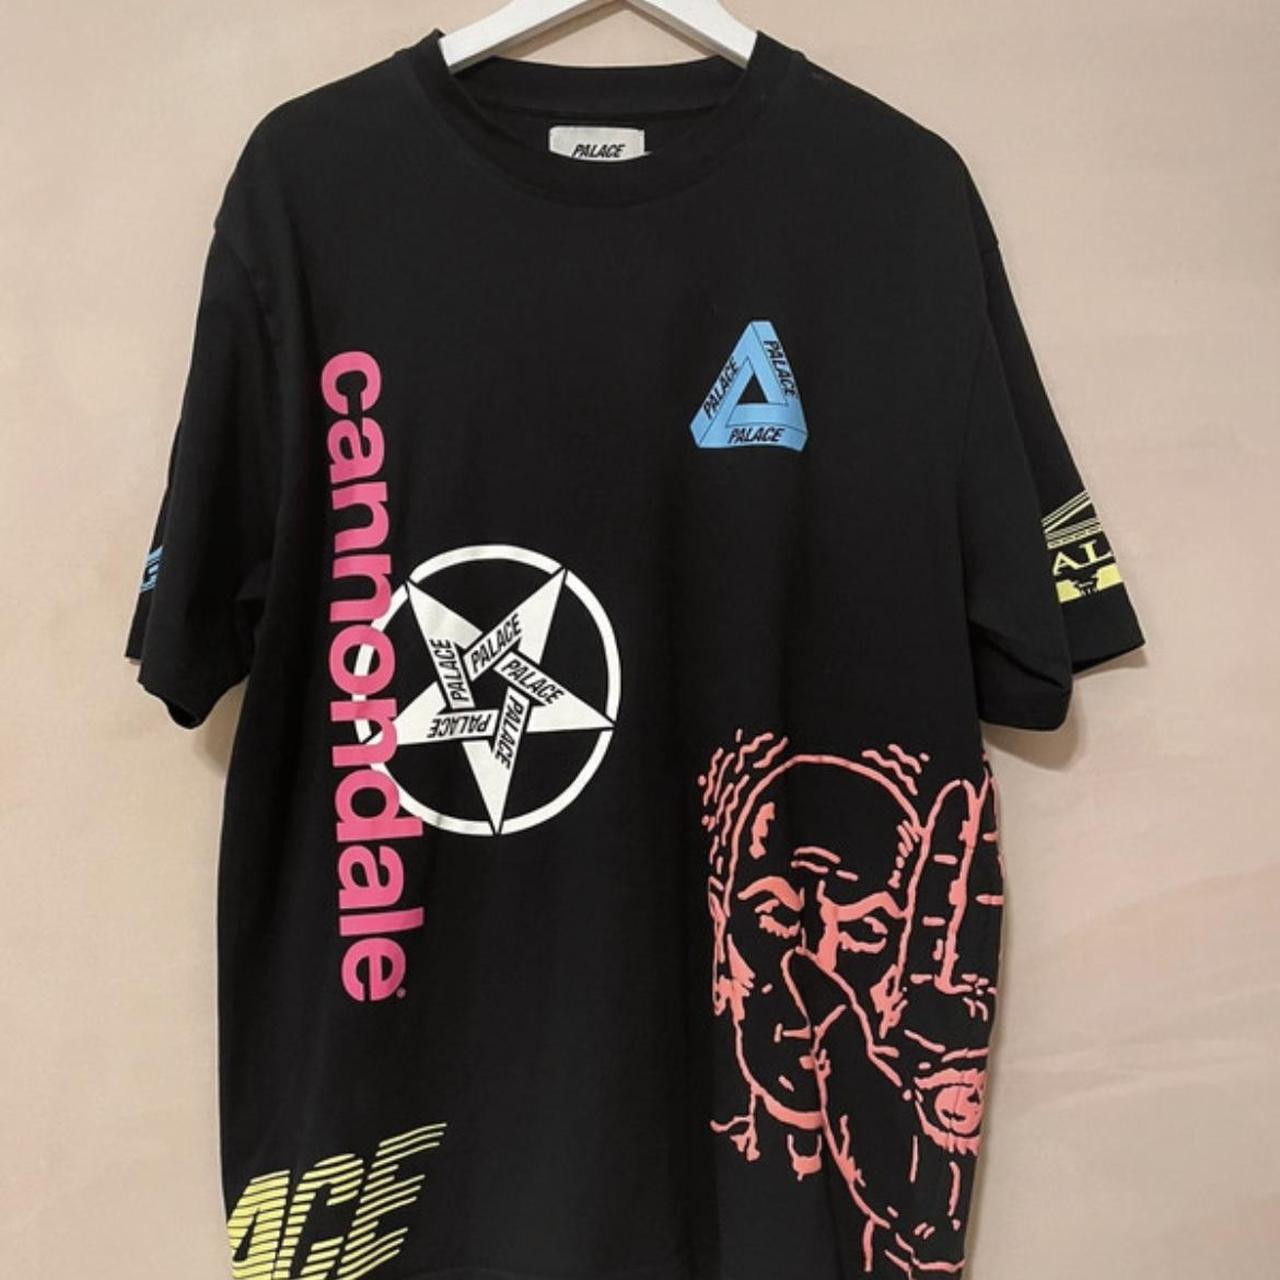 Palace x cannondale t shirt new no tags - Depop